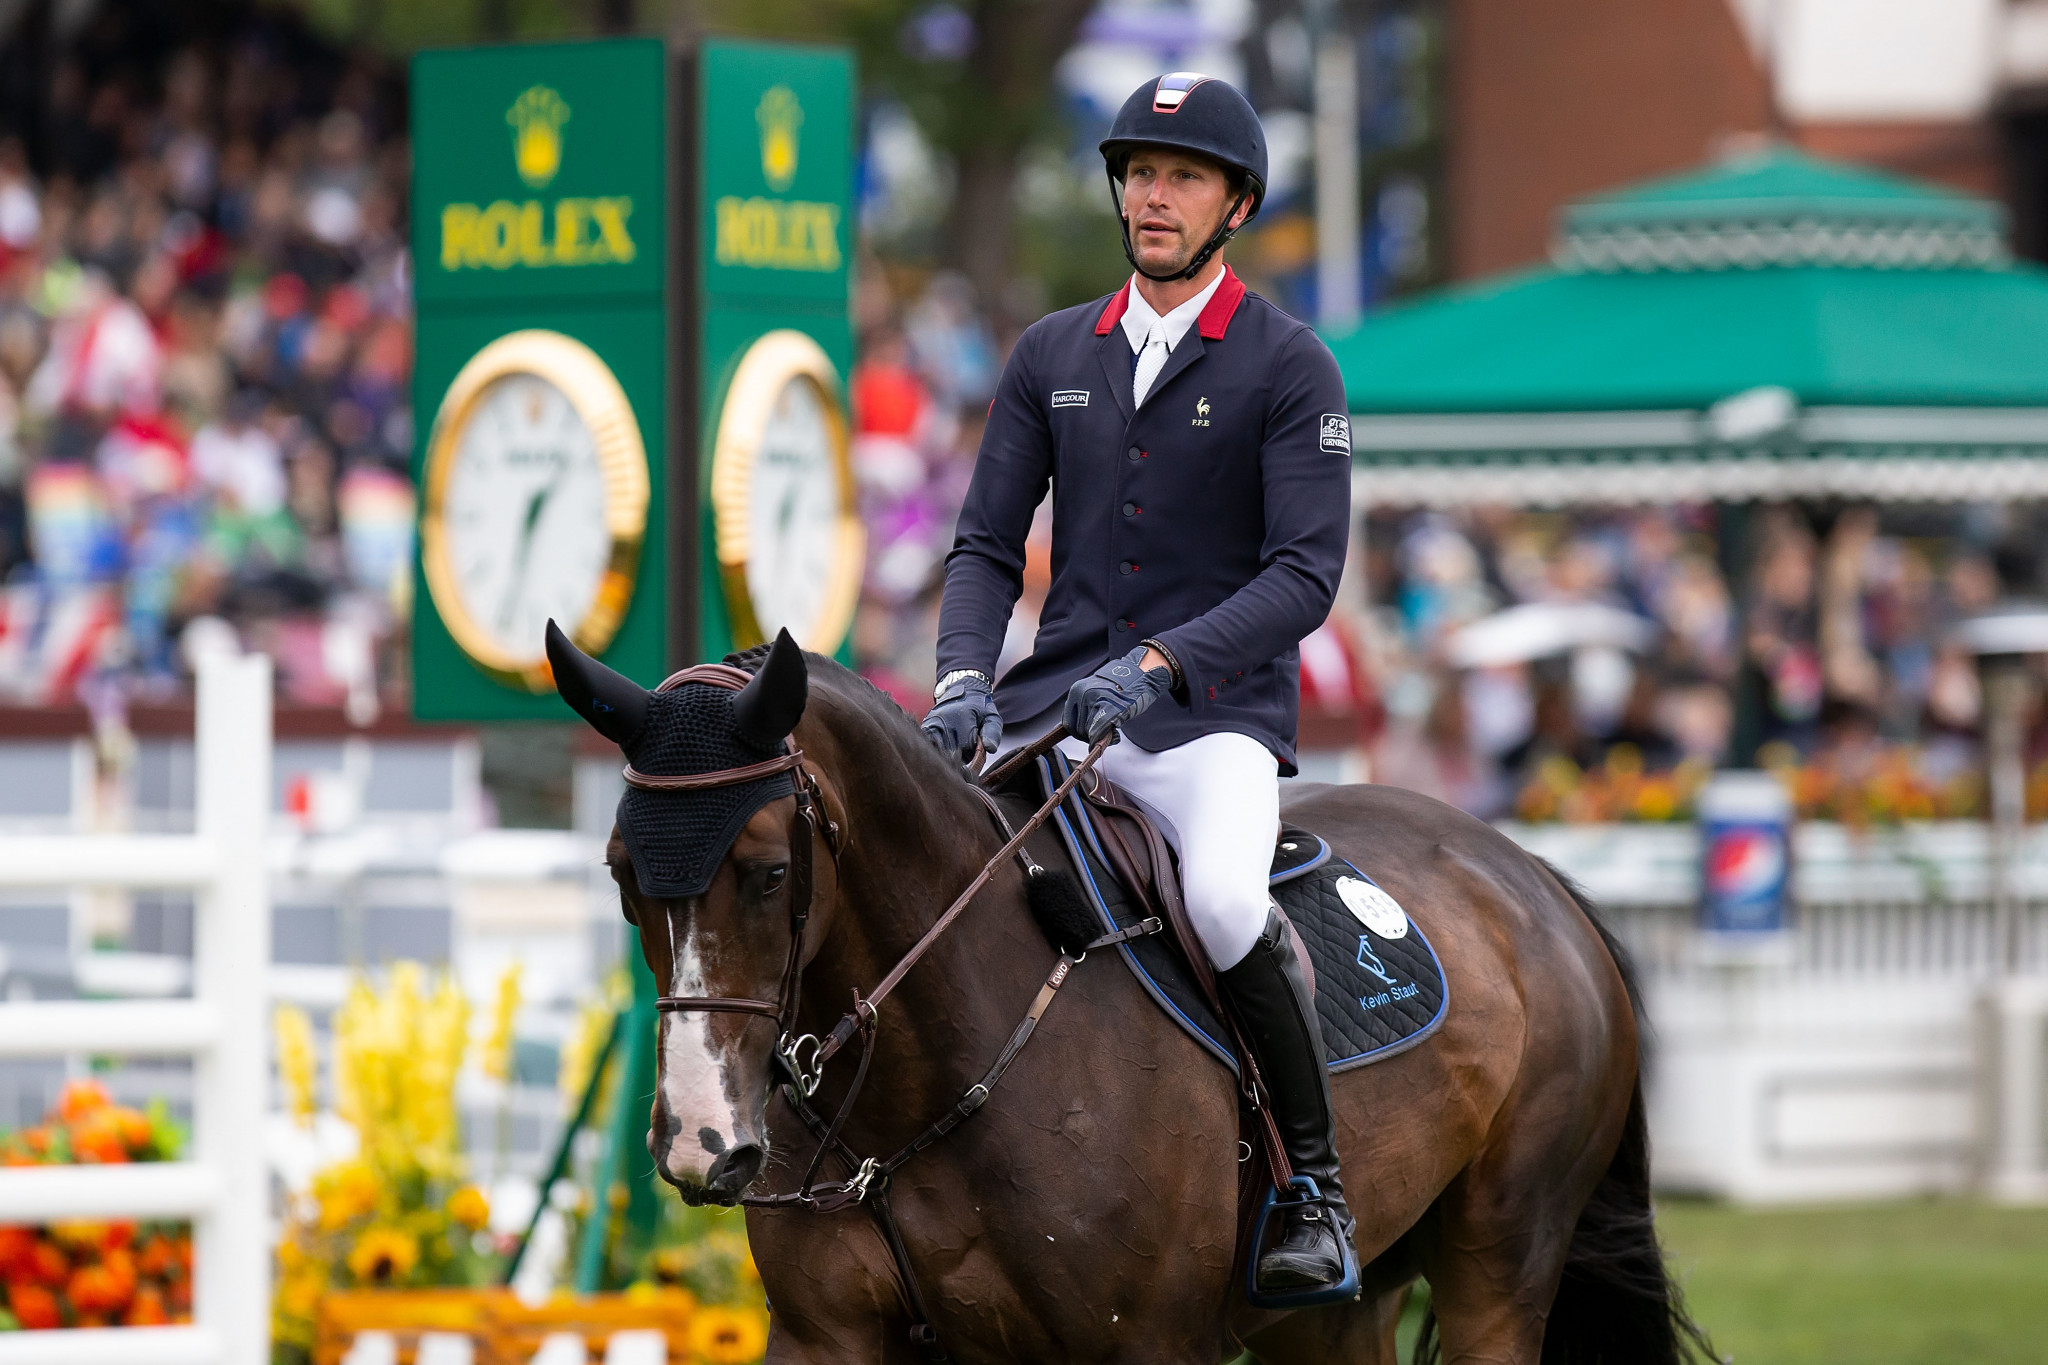 FEI launches investigation after abuse claims against Olympic champion Staut